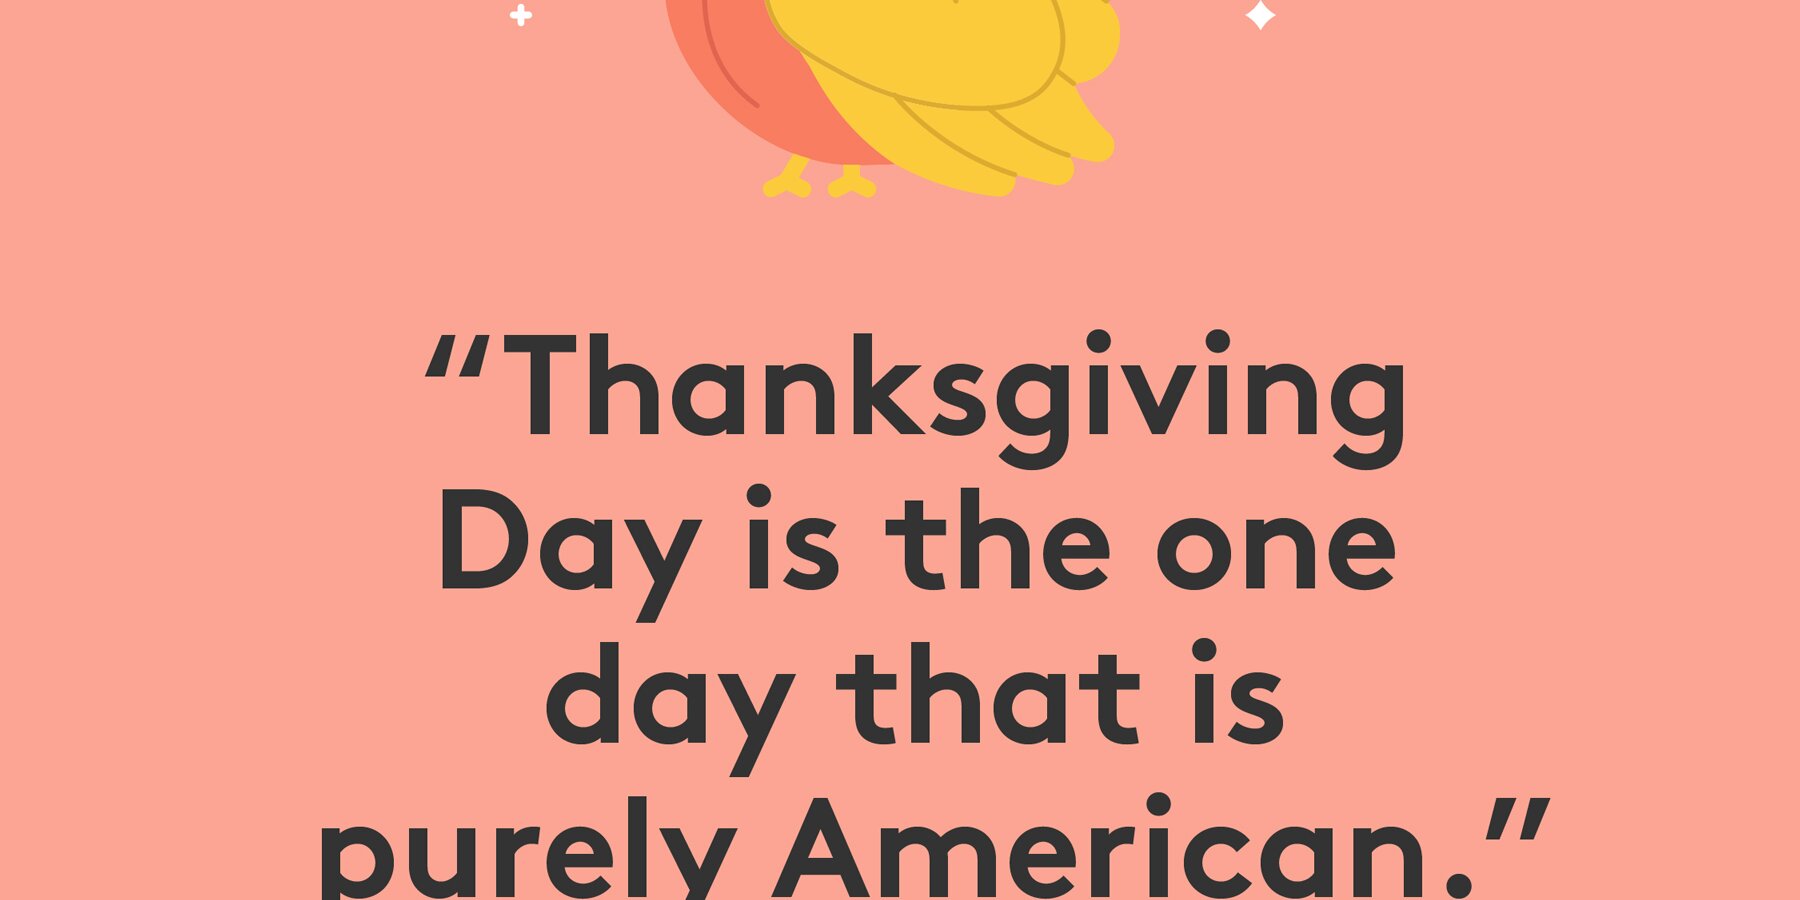 16 Thanksgiving Quotes: Funny, Inspirational, Thankful Sayings